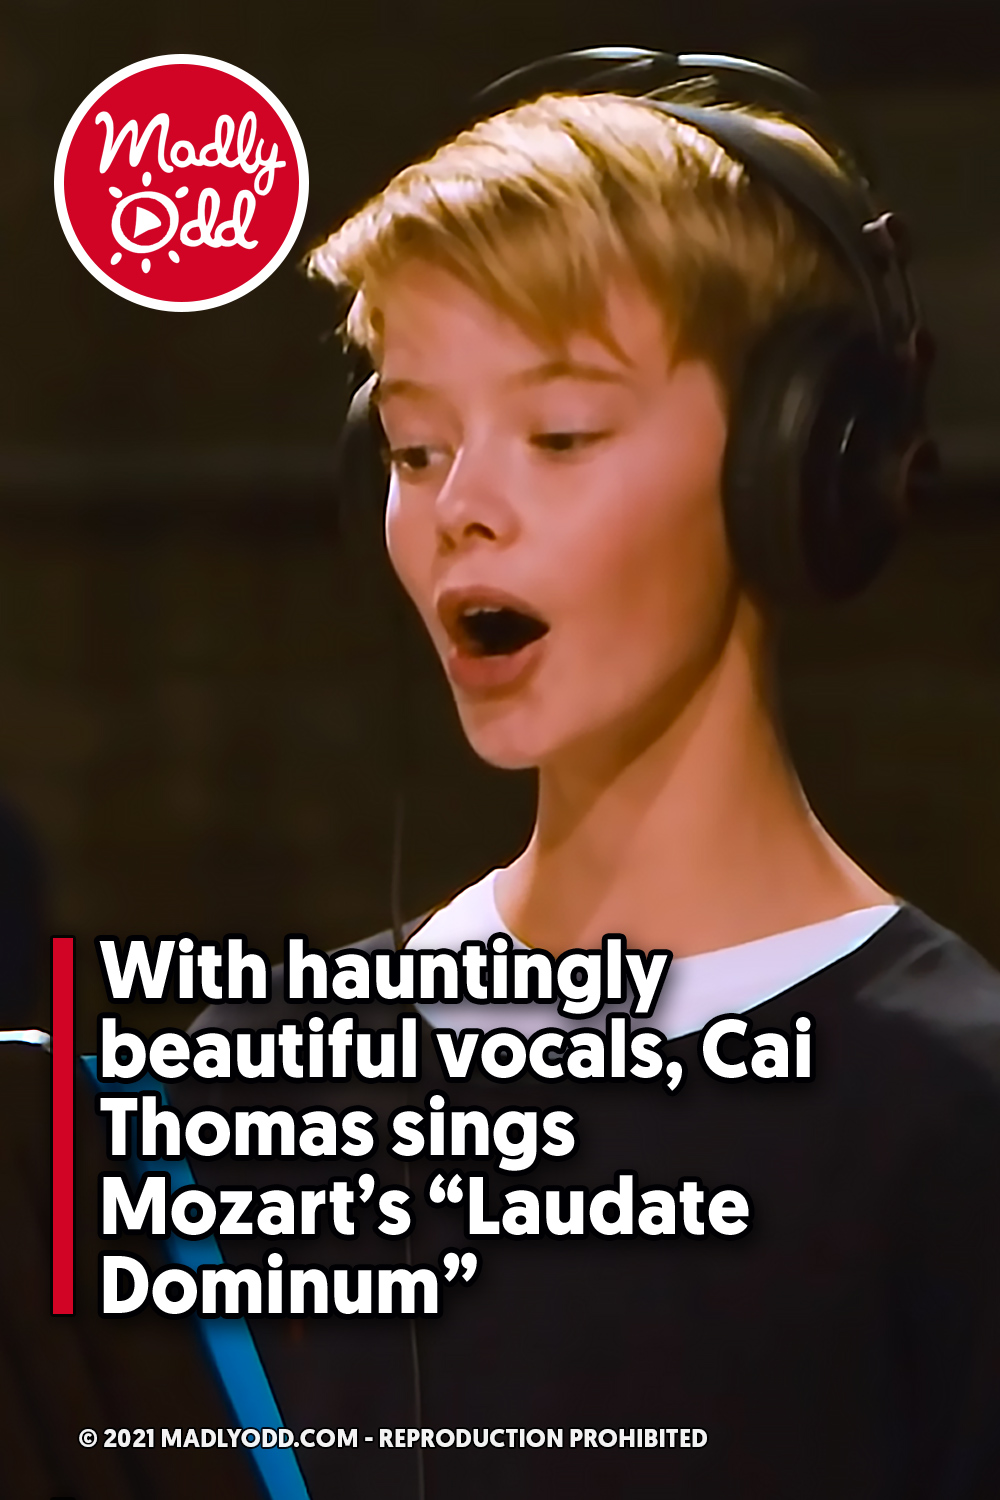 With hauntingly beautiful vocals, Cai Thomas sings Mozart’s “Laudate Dominum”